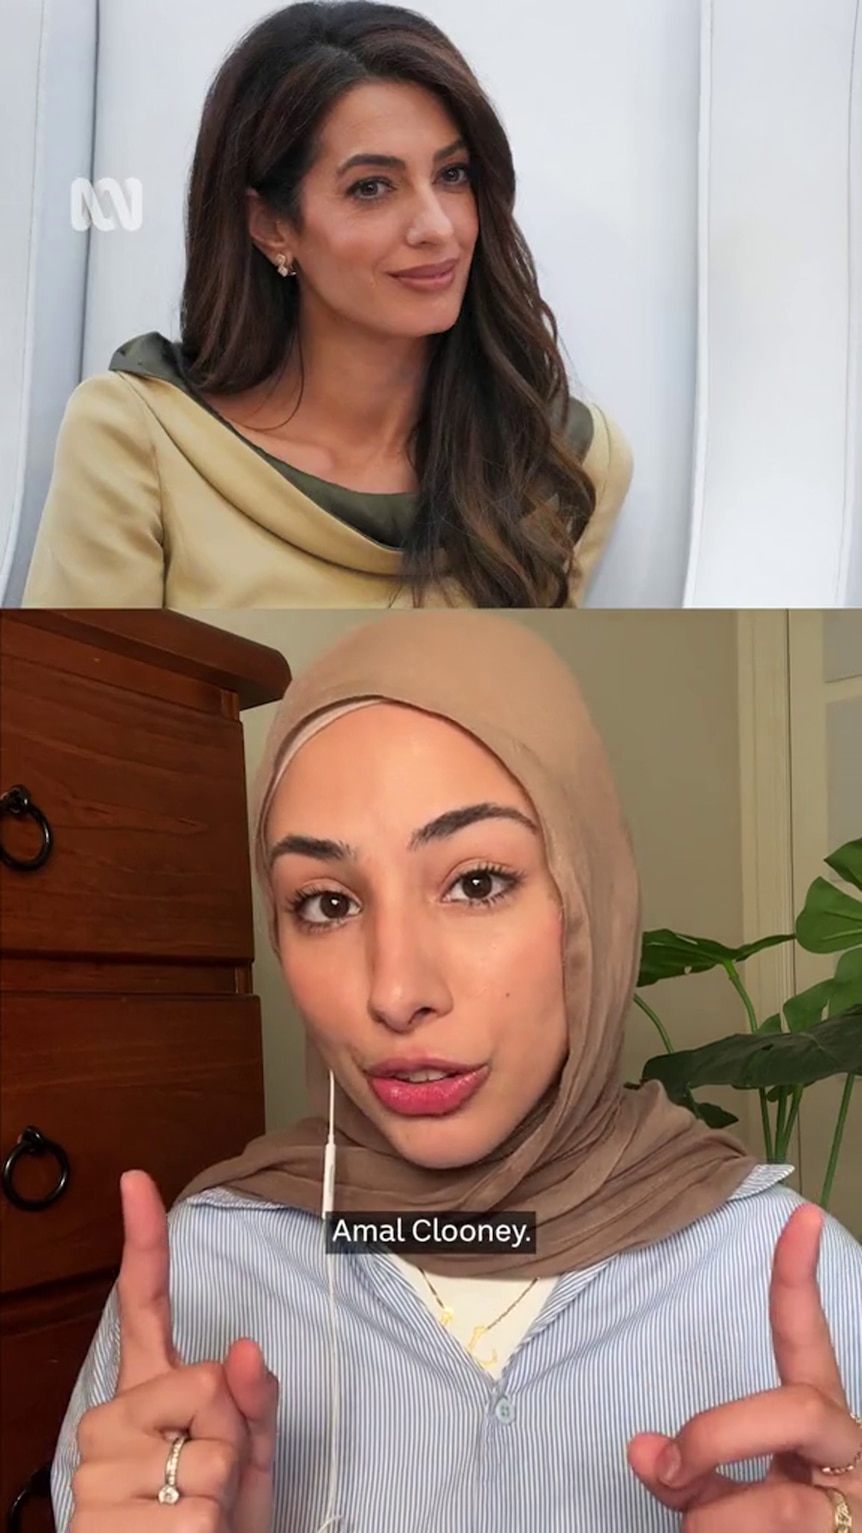 Photo composite shows two Middle Eastern women, one with long hair and one wearing hijab and pointing both index fingers up